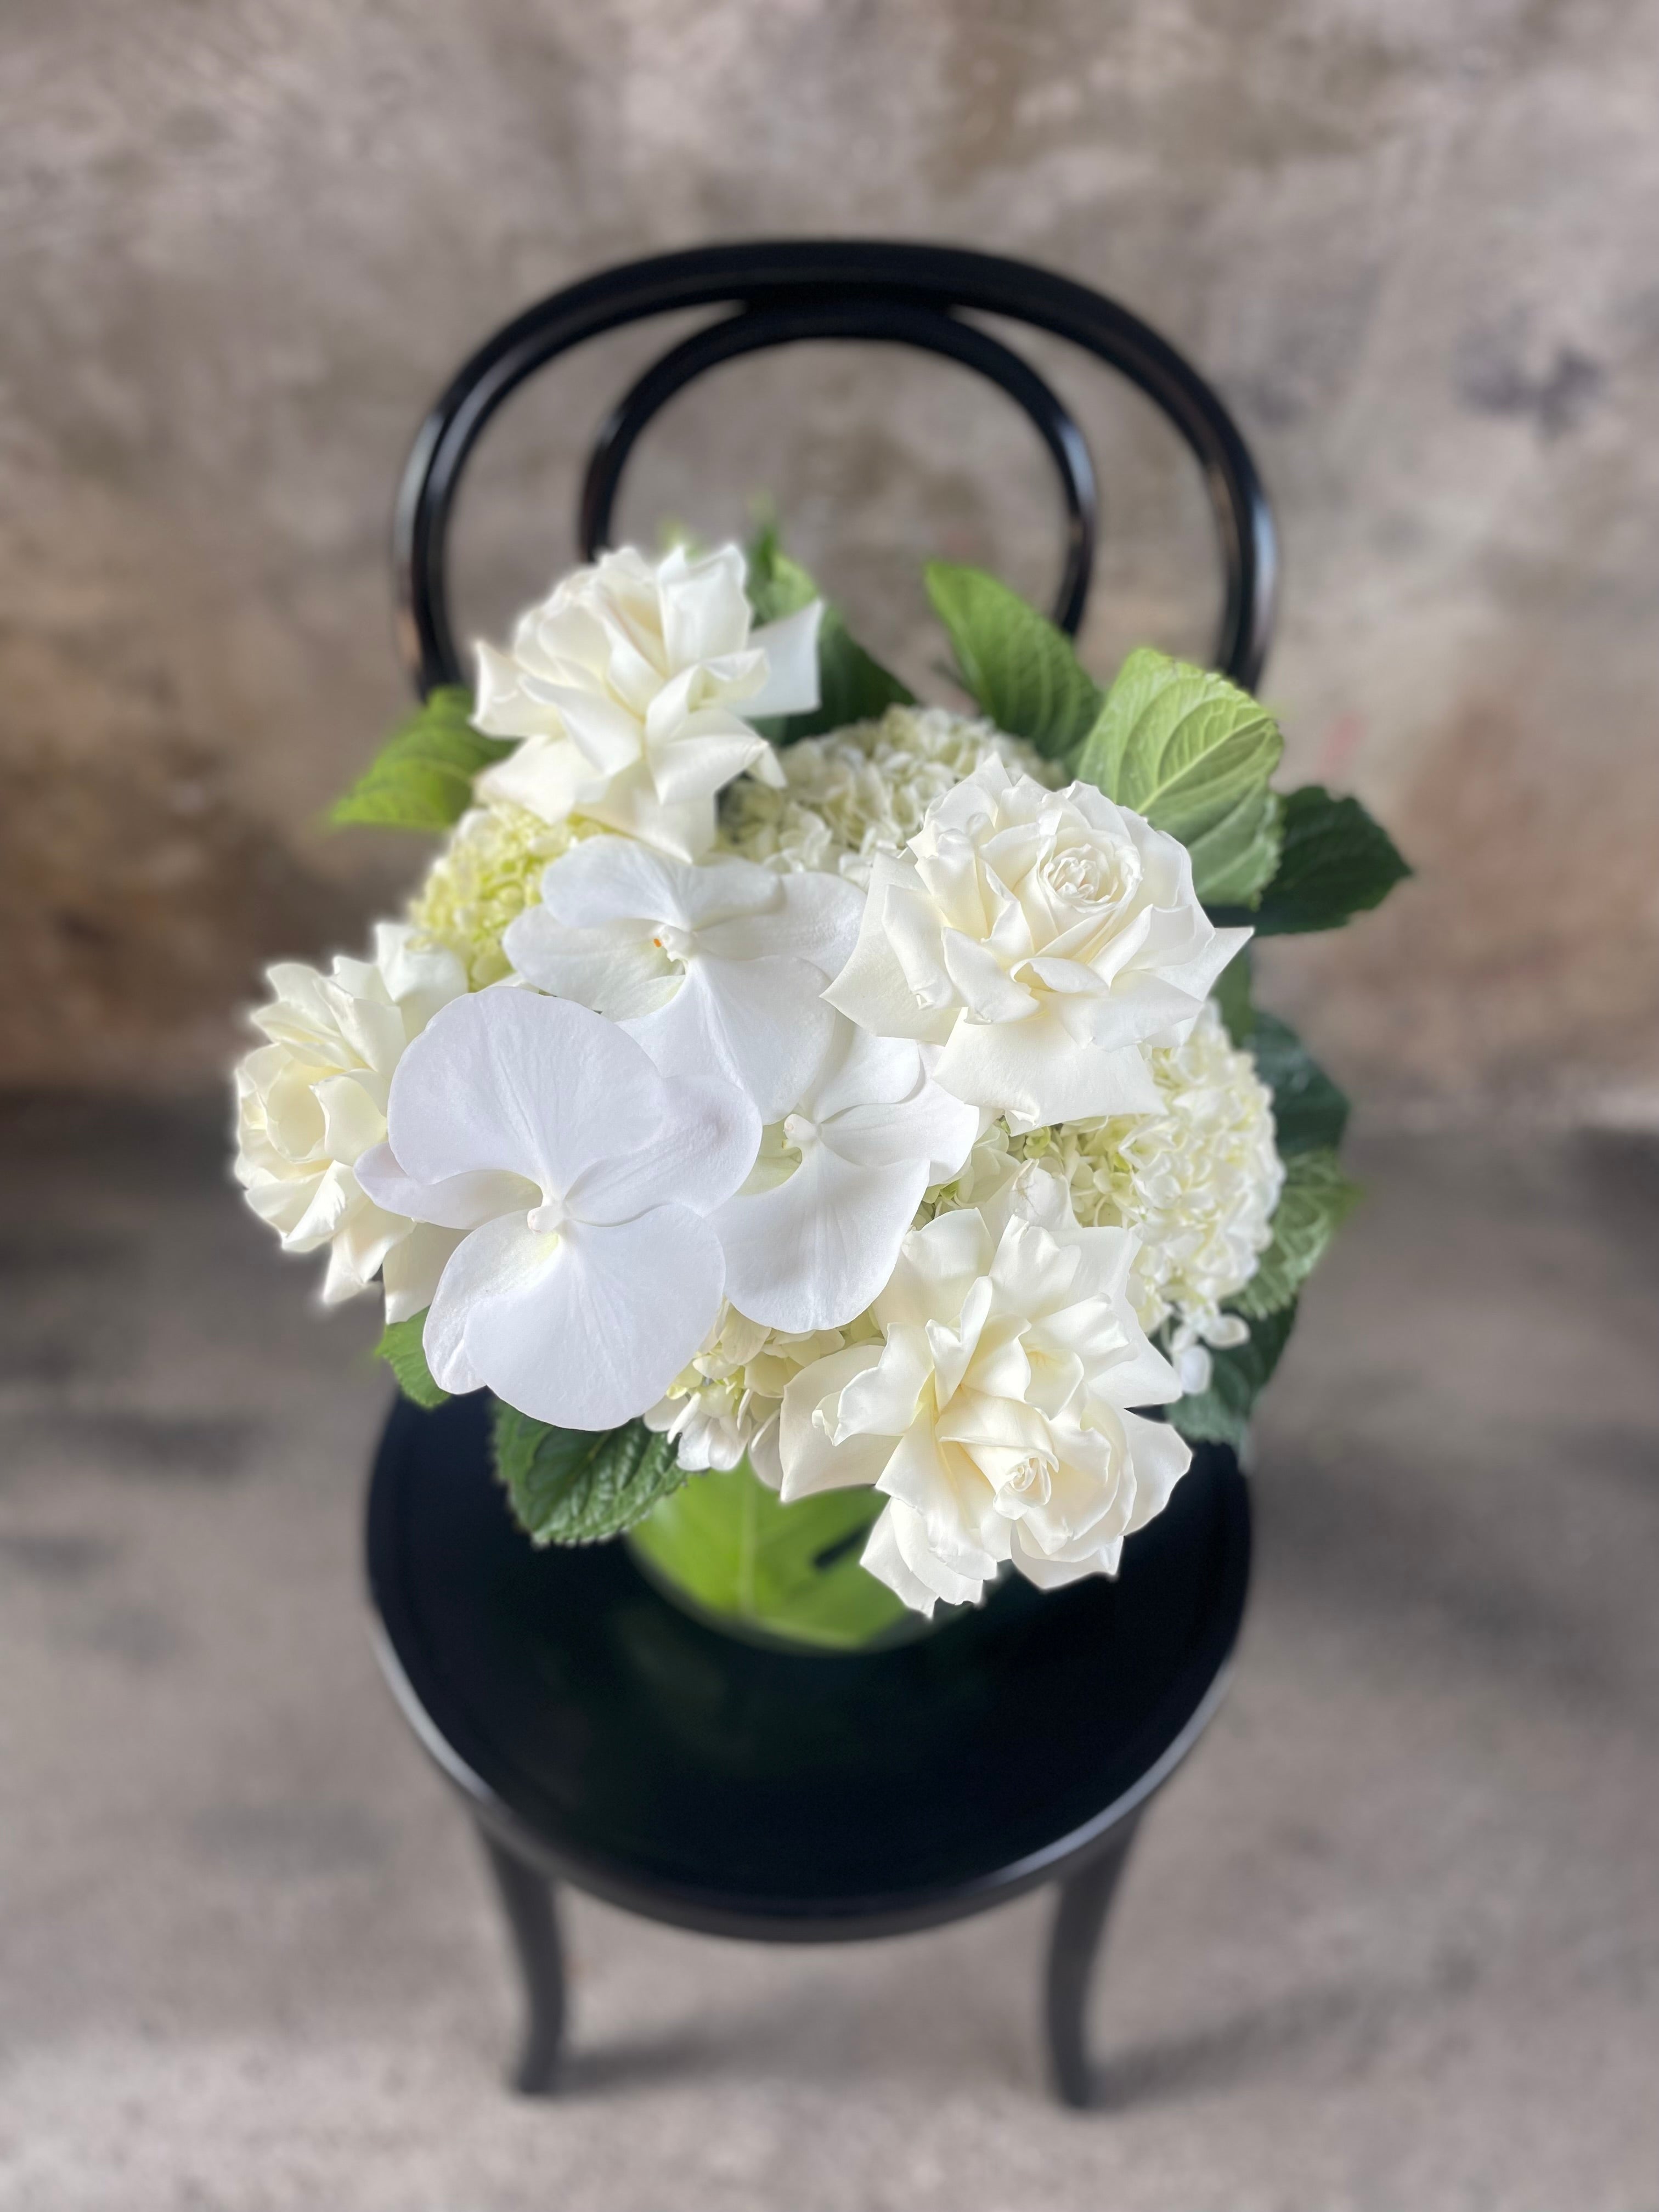 Close up image of White and green flowers displayed in a glass tapered vase, sitting on a black bentwood chair with a concrete wall background.